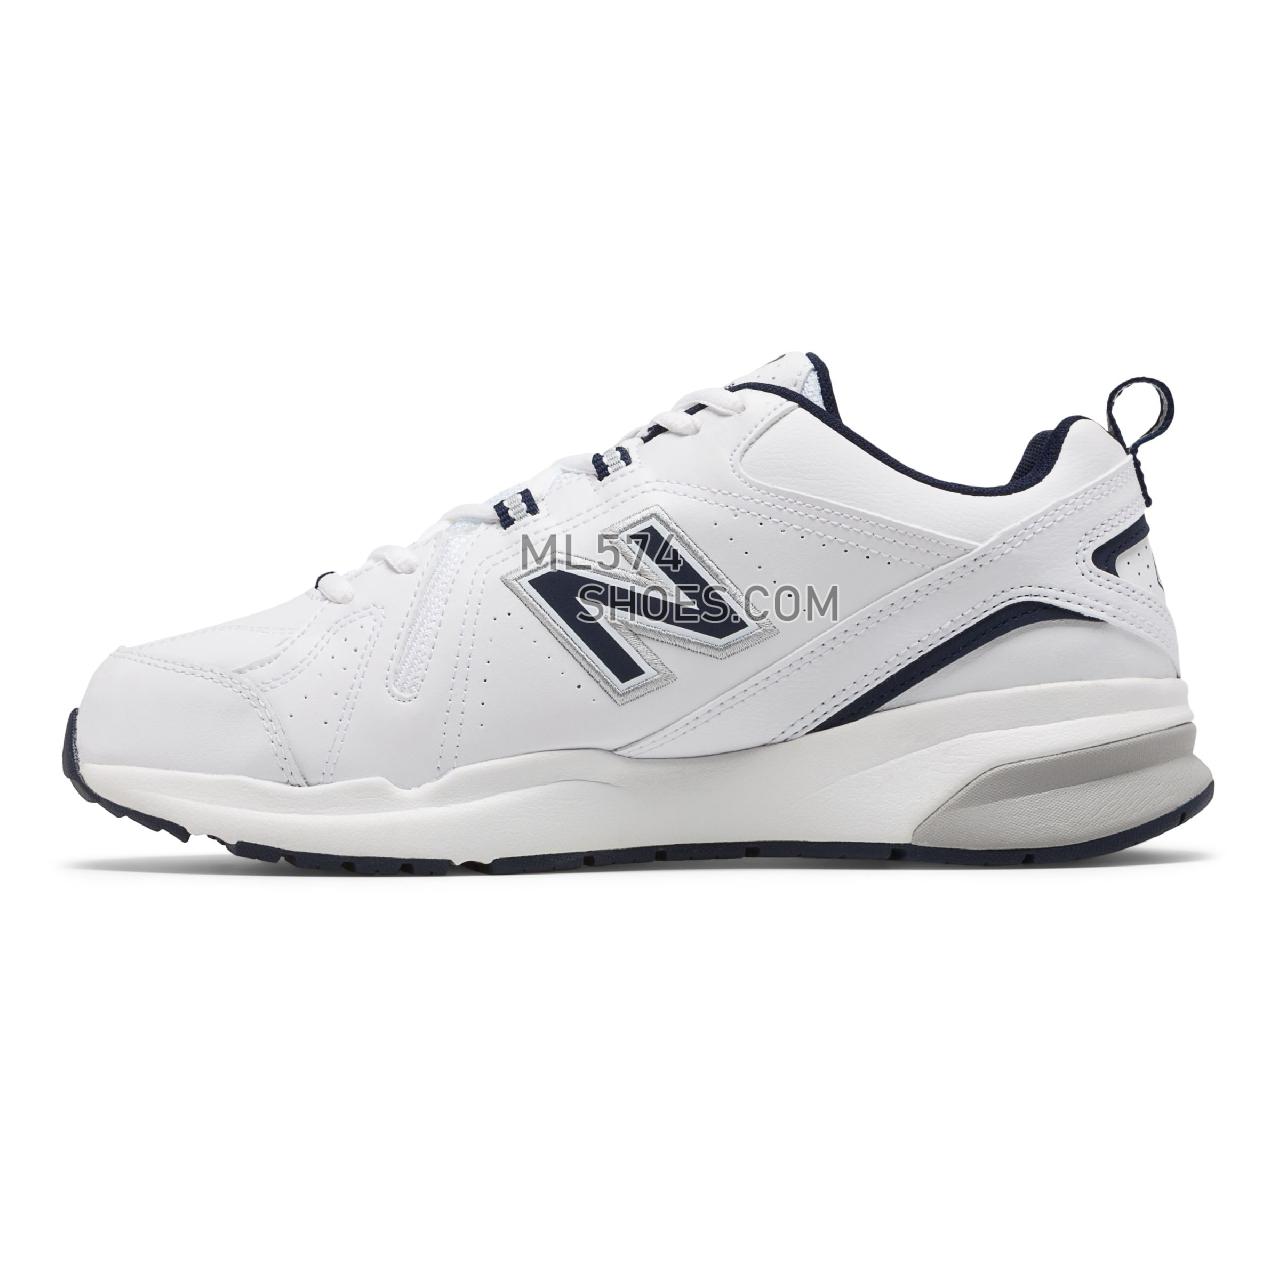 New Balance 608v5 - Men's Everyday Trainers - White with Navy - MX608WN5